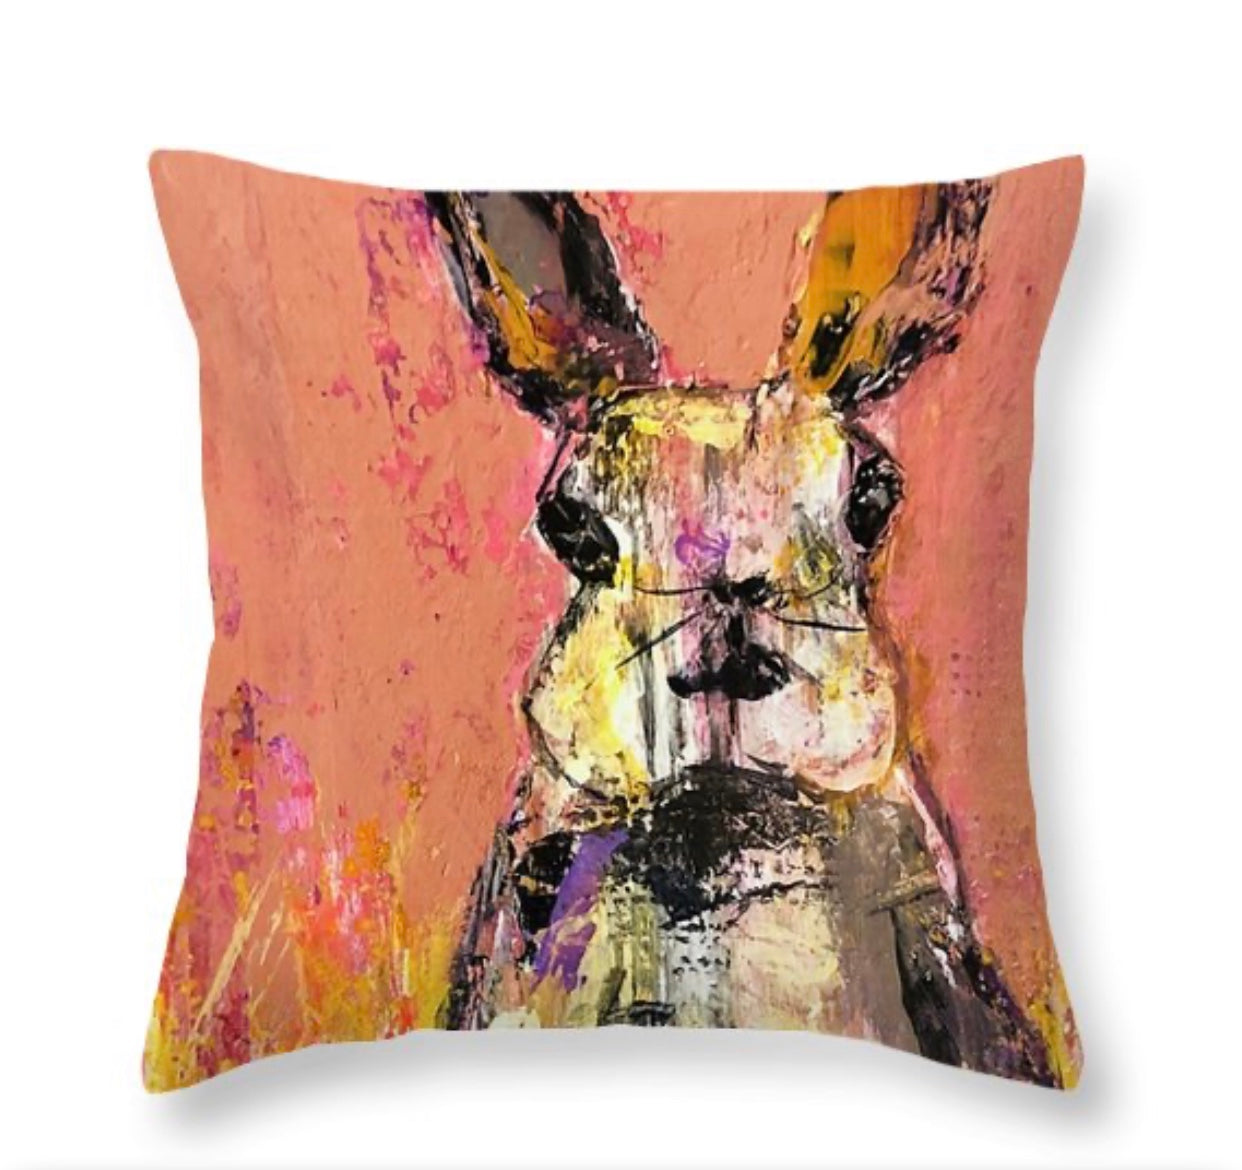 SOLD Pillow Cover "Bad Hare Day"